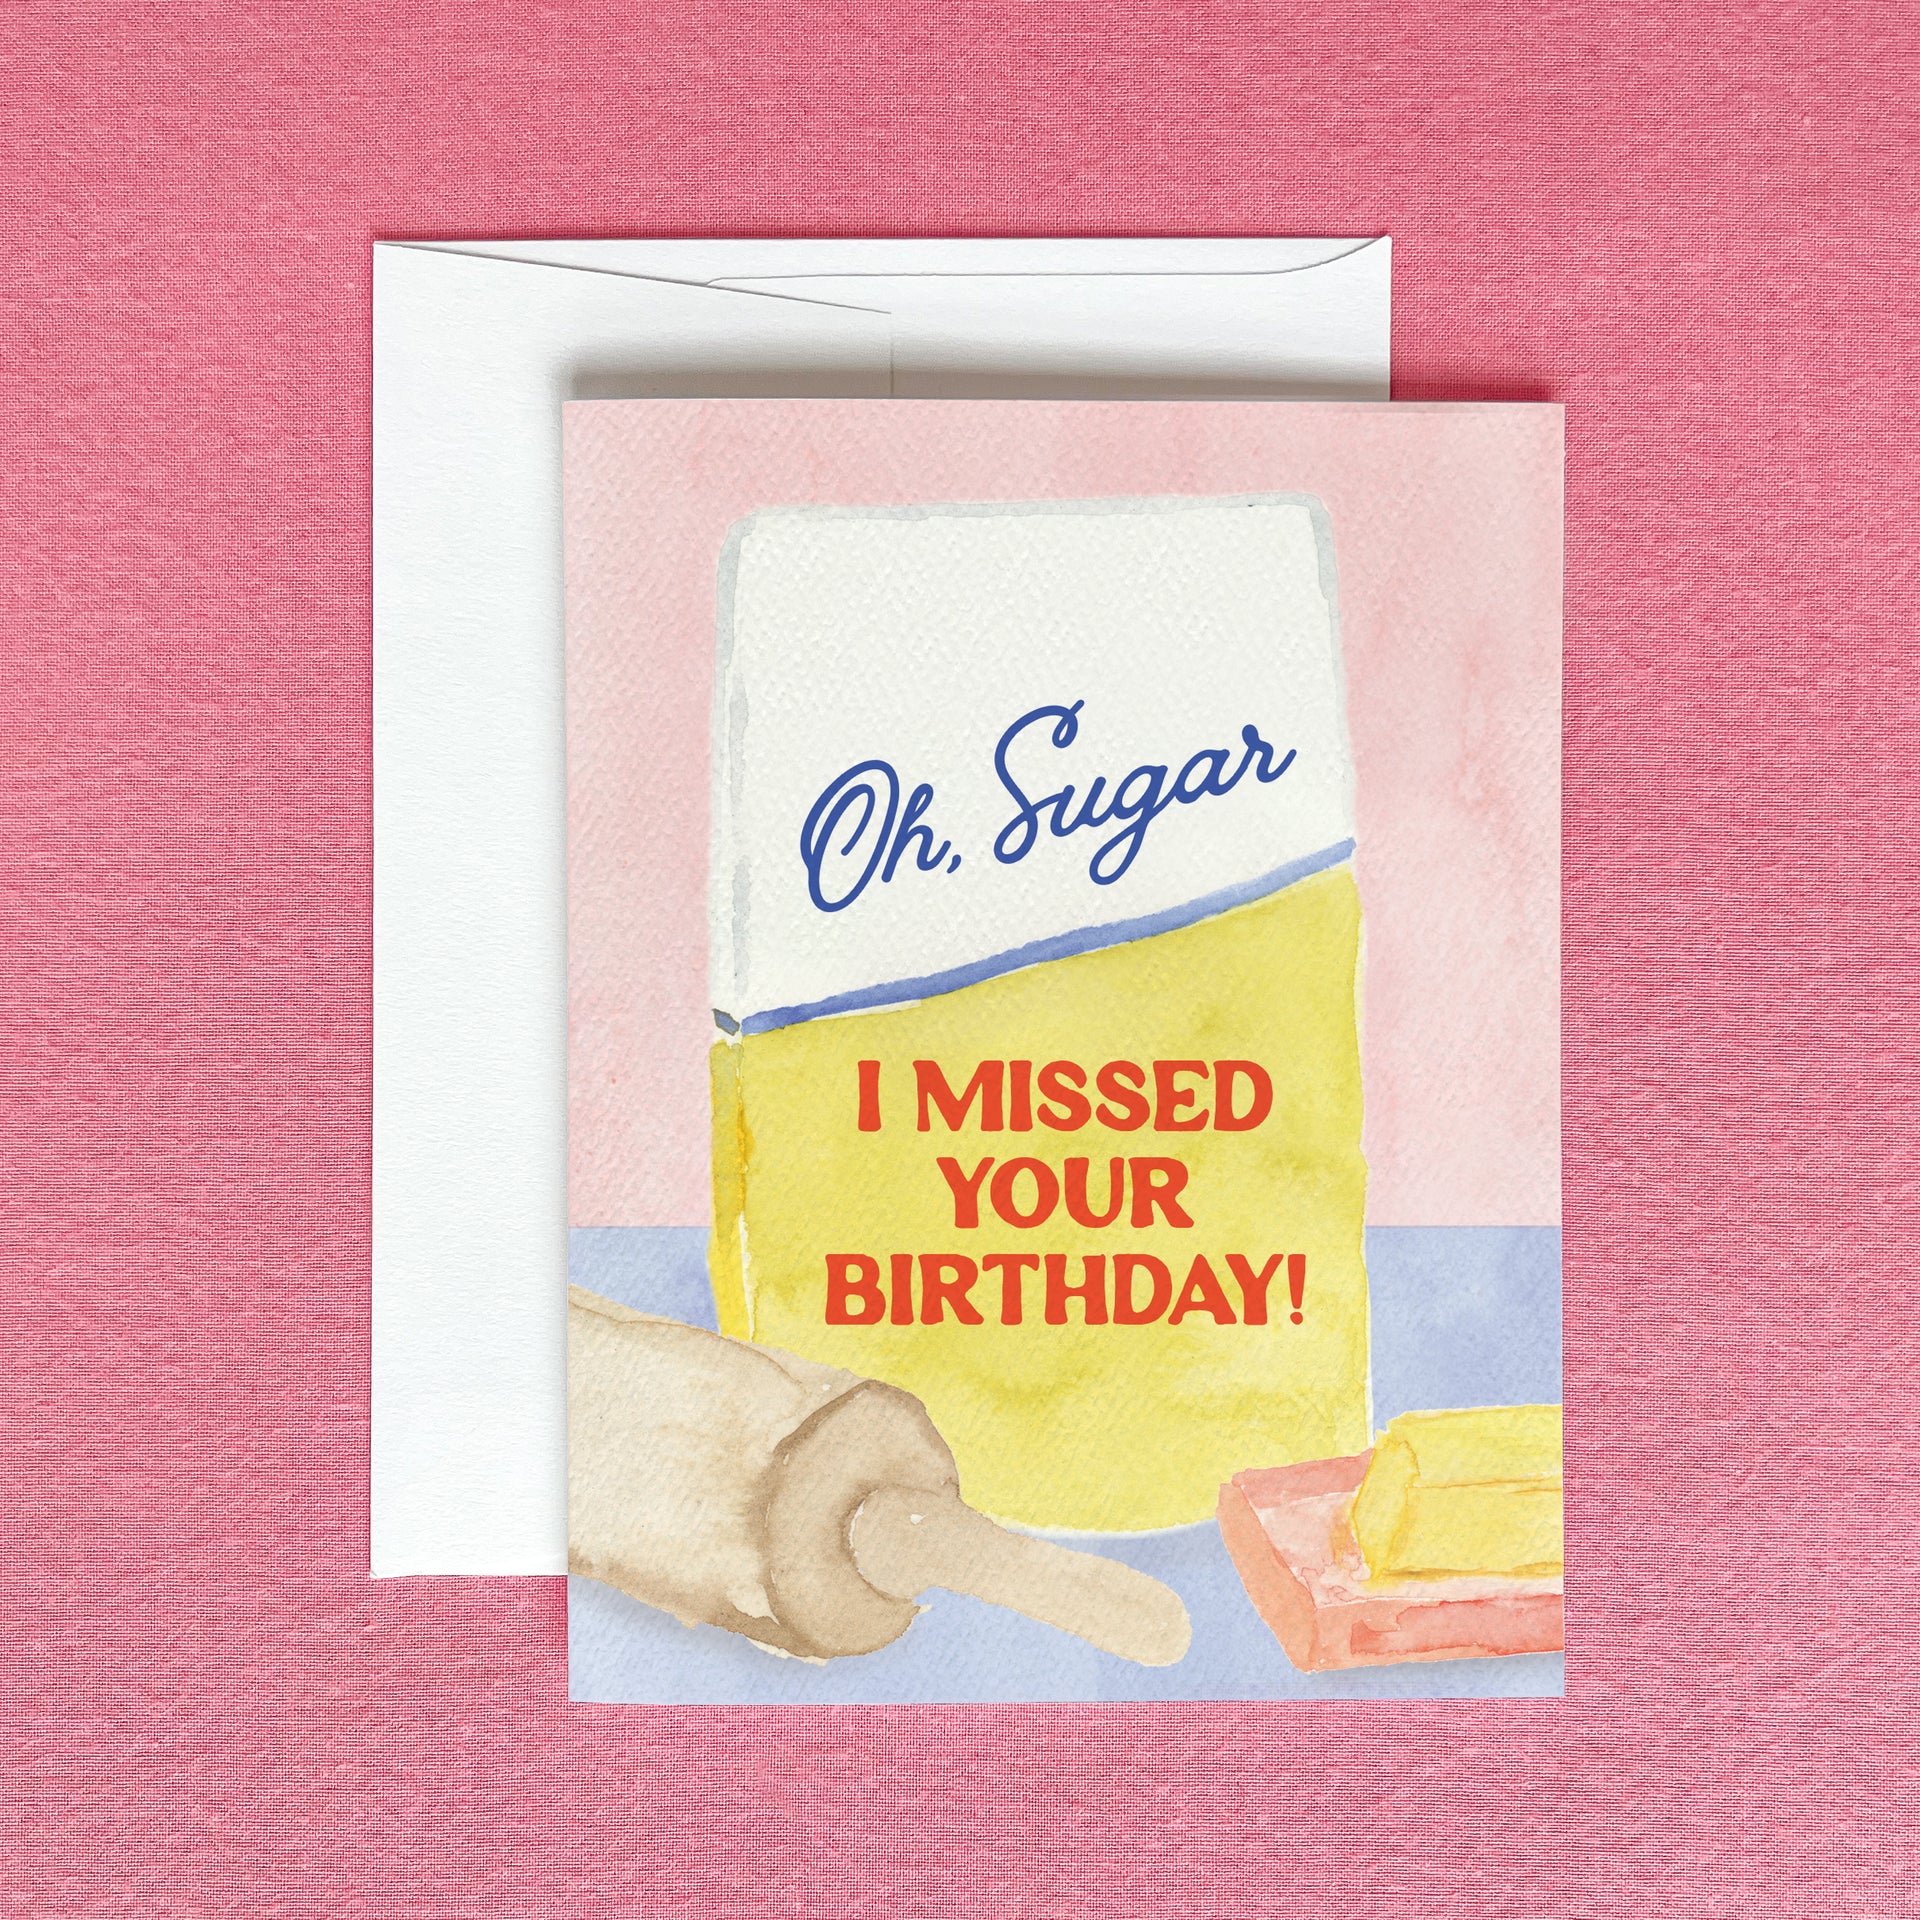 "Oh Sugar, I missed your birthday!" Greeting Card by Gert & Co